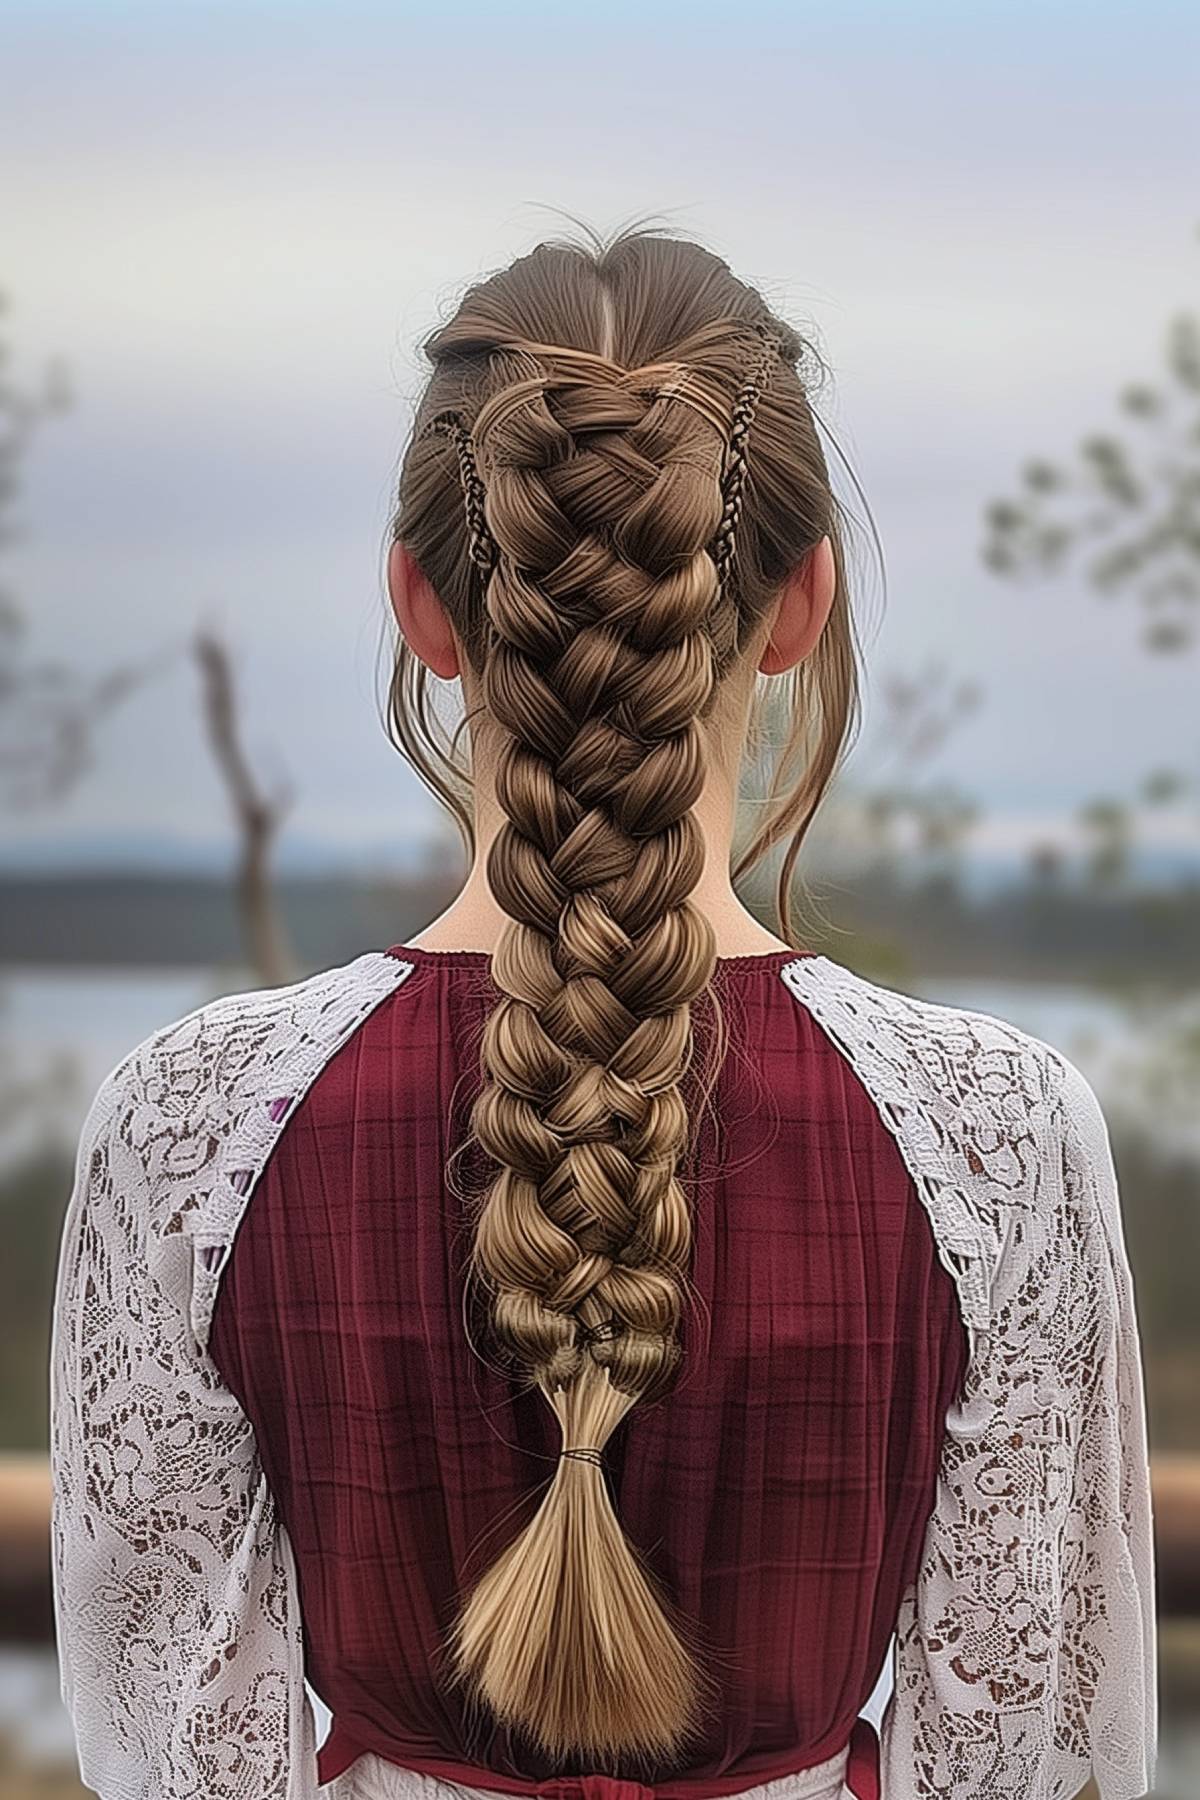 Complex six-strand bubble braid providing texture and volume for an intricate and stunning hairstyle.